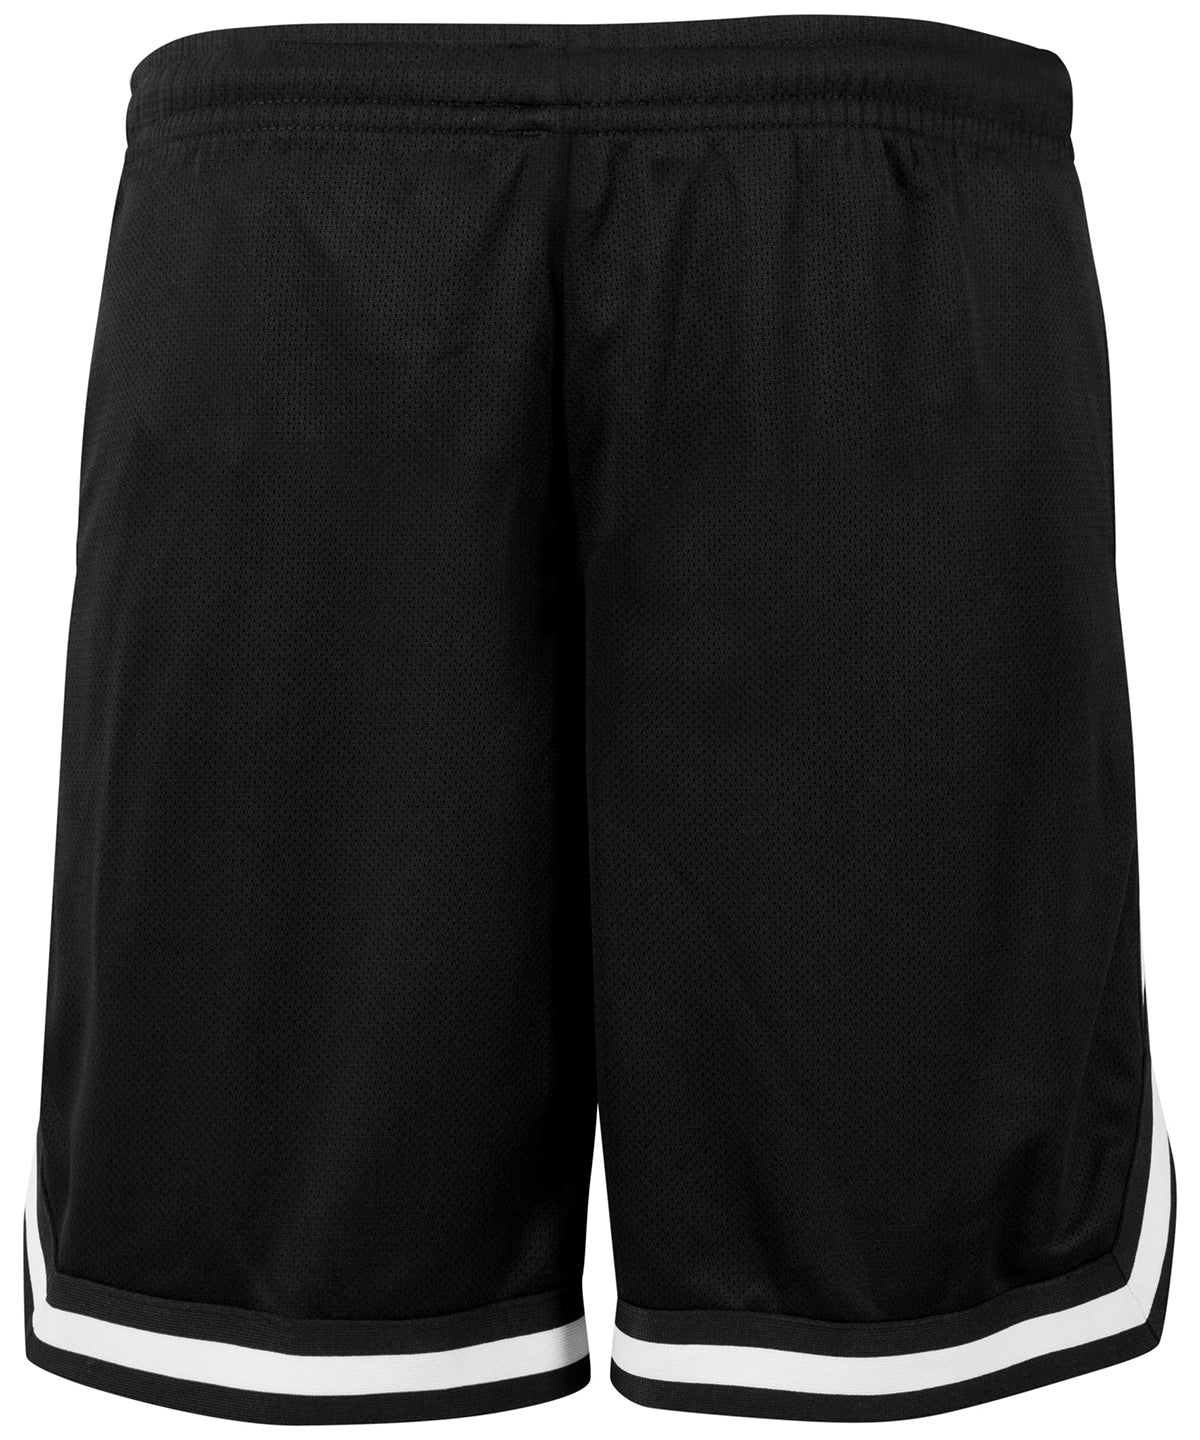 Personalised Shorts - Black Build Your Brand Two-tone mesh shorts